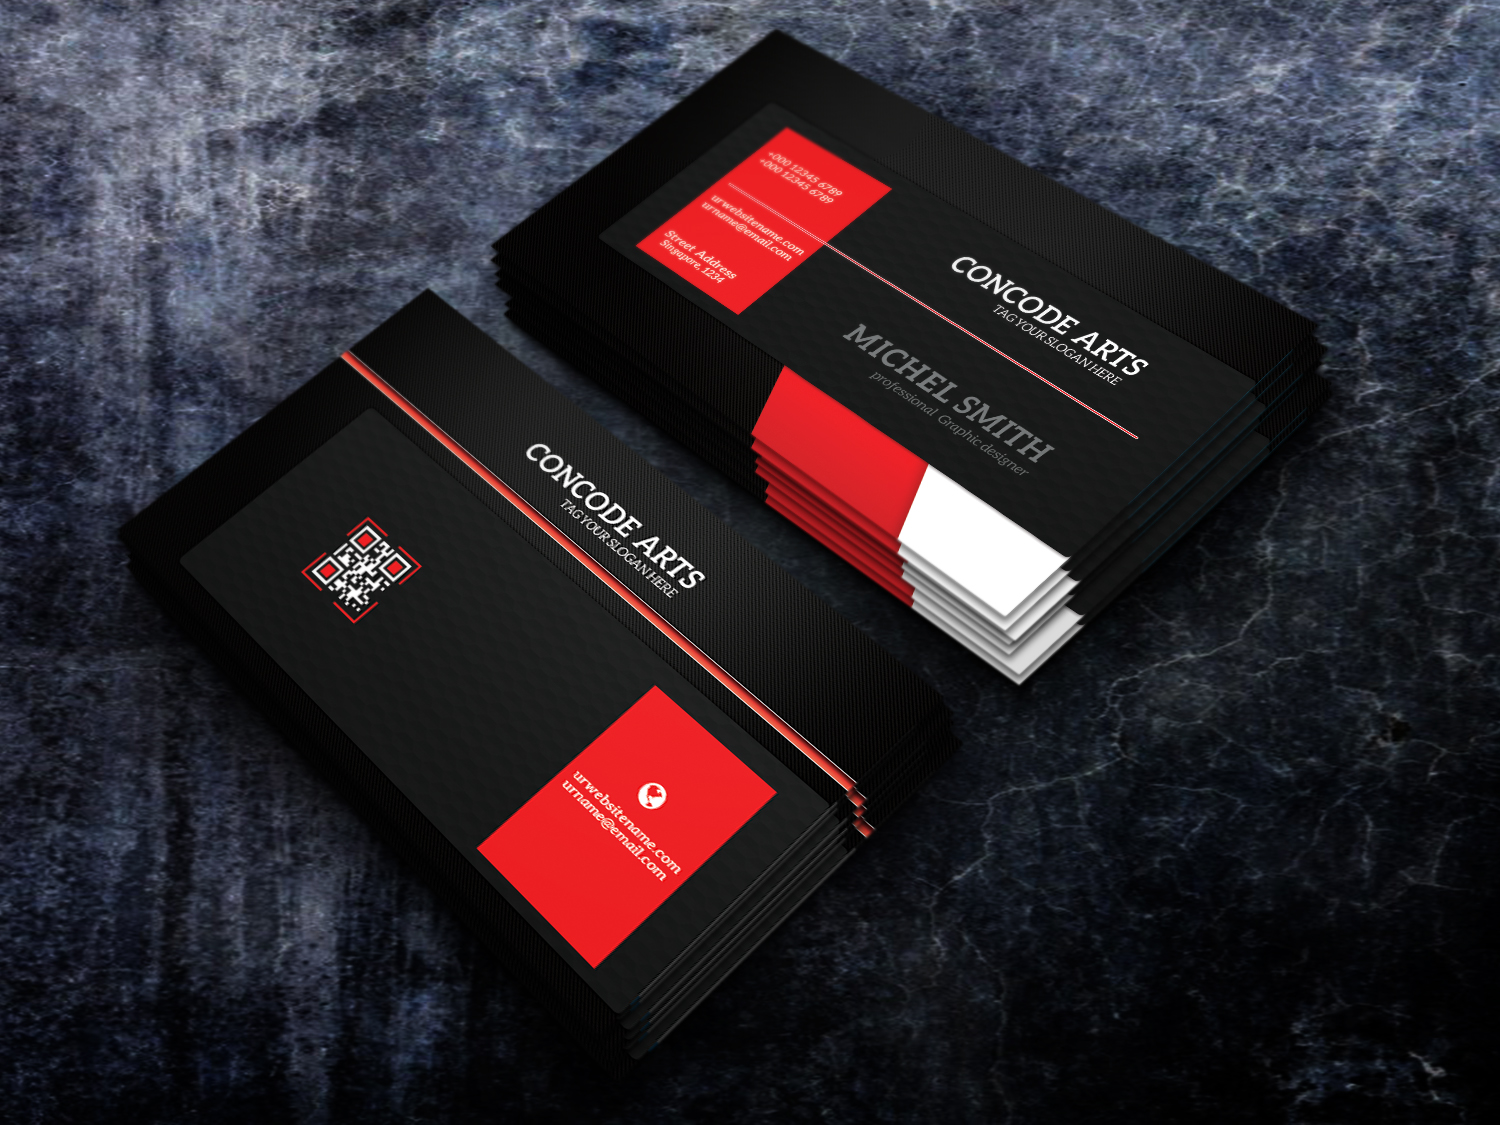 Free download Black color business cards vol 102 - Creative free cards ...